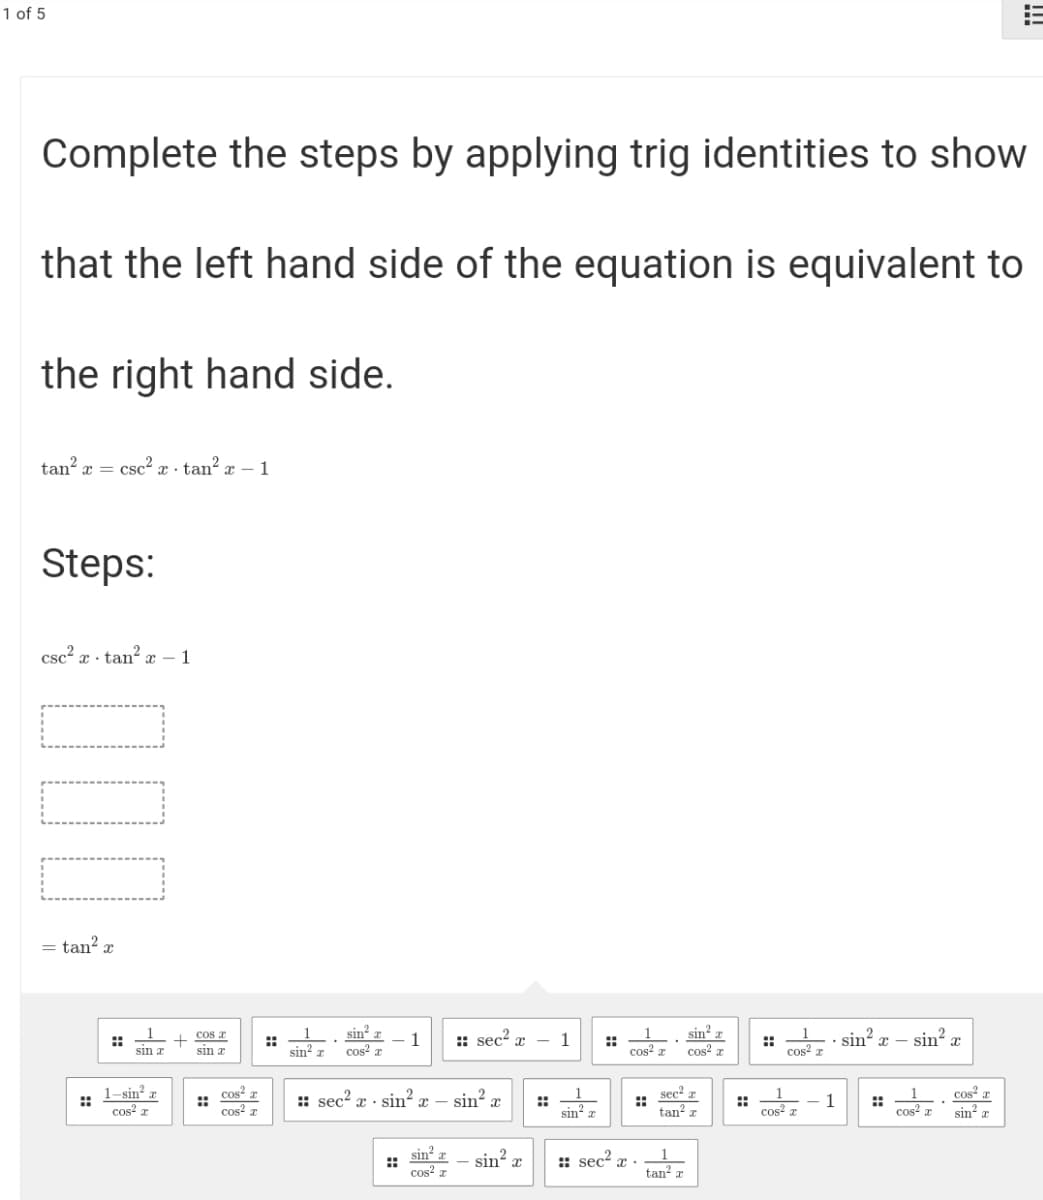 1 of 5
Complete the steps by applying trig identities to show
that the left hand side of the equation is equivalent to
the right hand side.
tan? x = csc² x · tan² x – 1
Steps:
csc? x · tan? x – 1
= tan? r
cos a
sin?
sin? x – sin? x
sin
::
sin a
::
sin r
1
:: sec? x
1
::
cos z
::
cos? r
sin a
cos? r
cos4 a
1-sin² æ
::
cos? z
cos² x
cos? r
sin? x
sec? r
::
tan? r
:: sec? x ·
sin? x -
::
sin a
::
cos? r
1
::
cos x
cos a
sin a
sin? z
1
tan? x
sin?,
: sec?
::
cos? a
!!!
